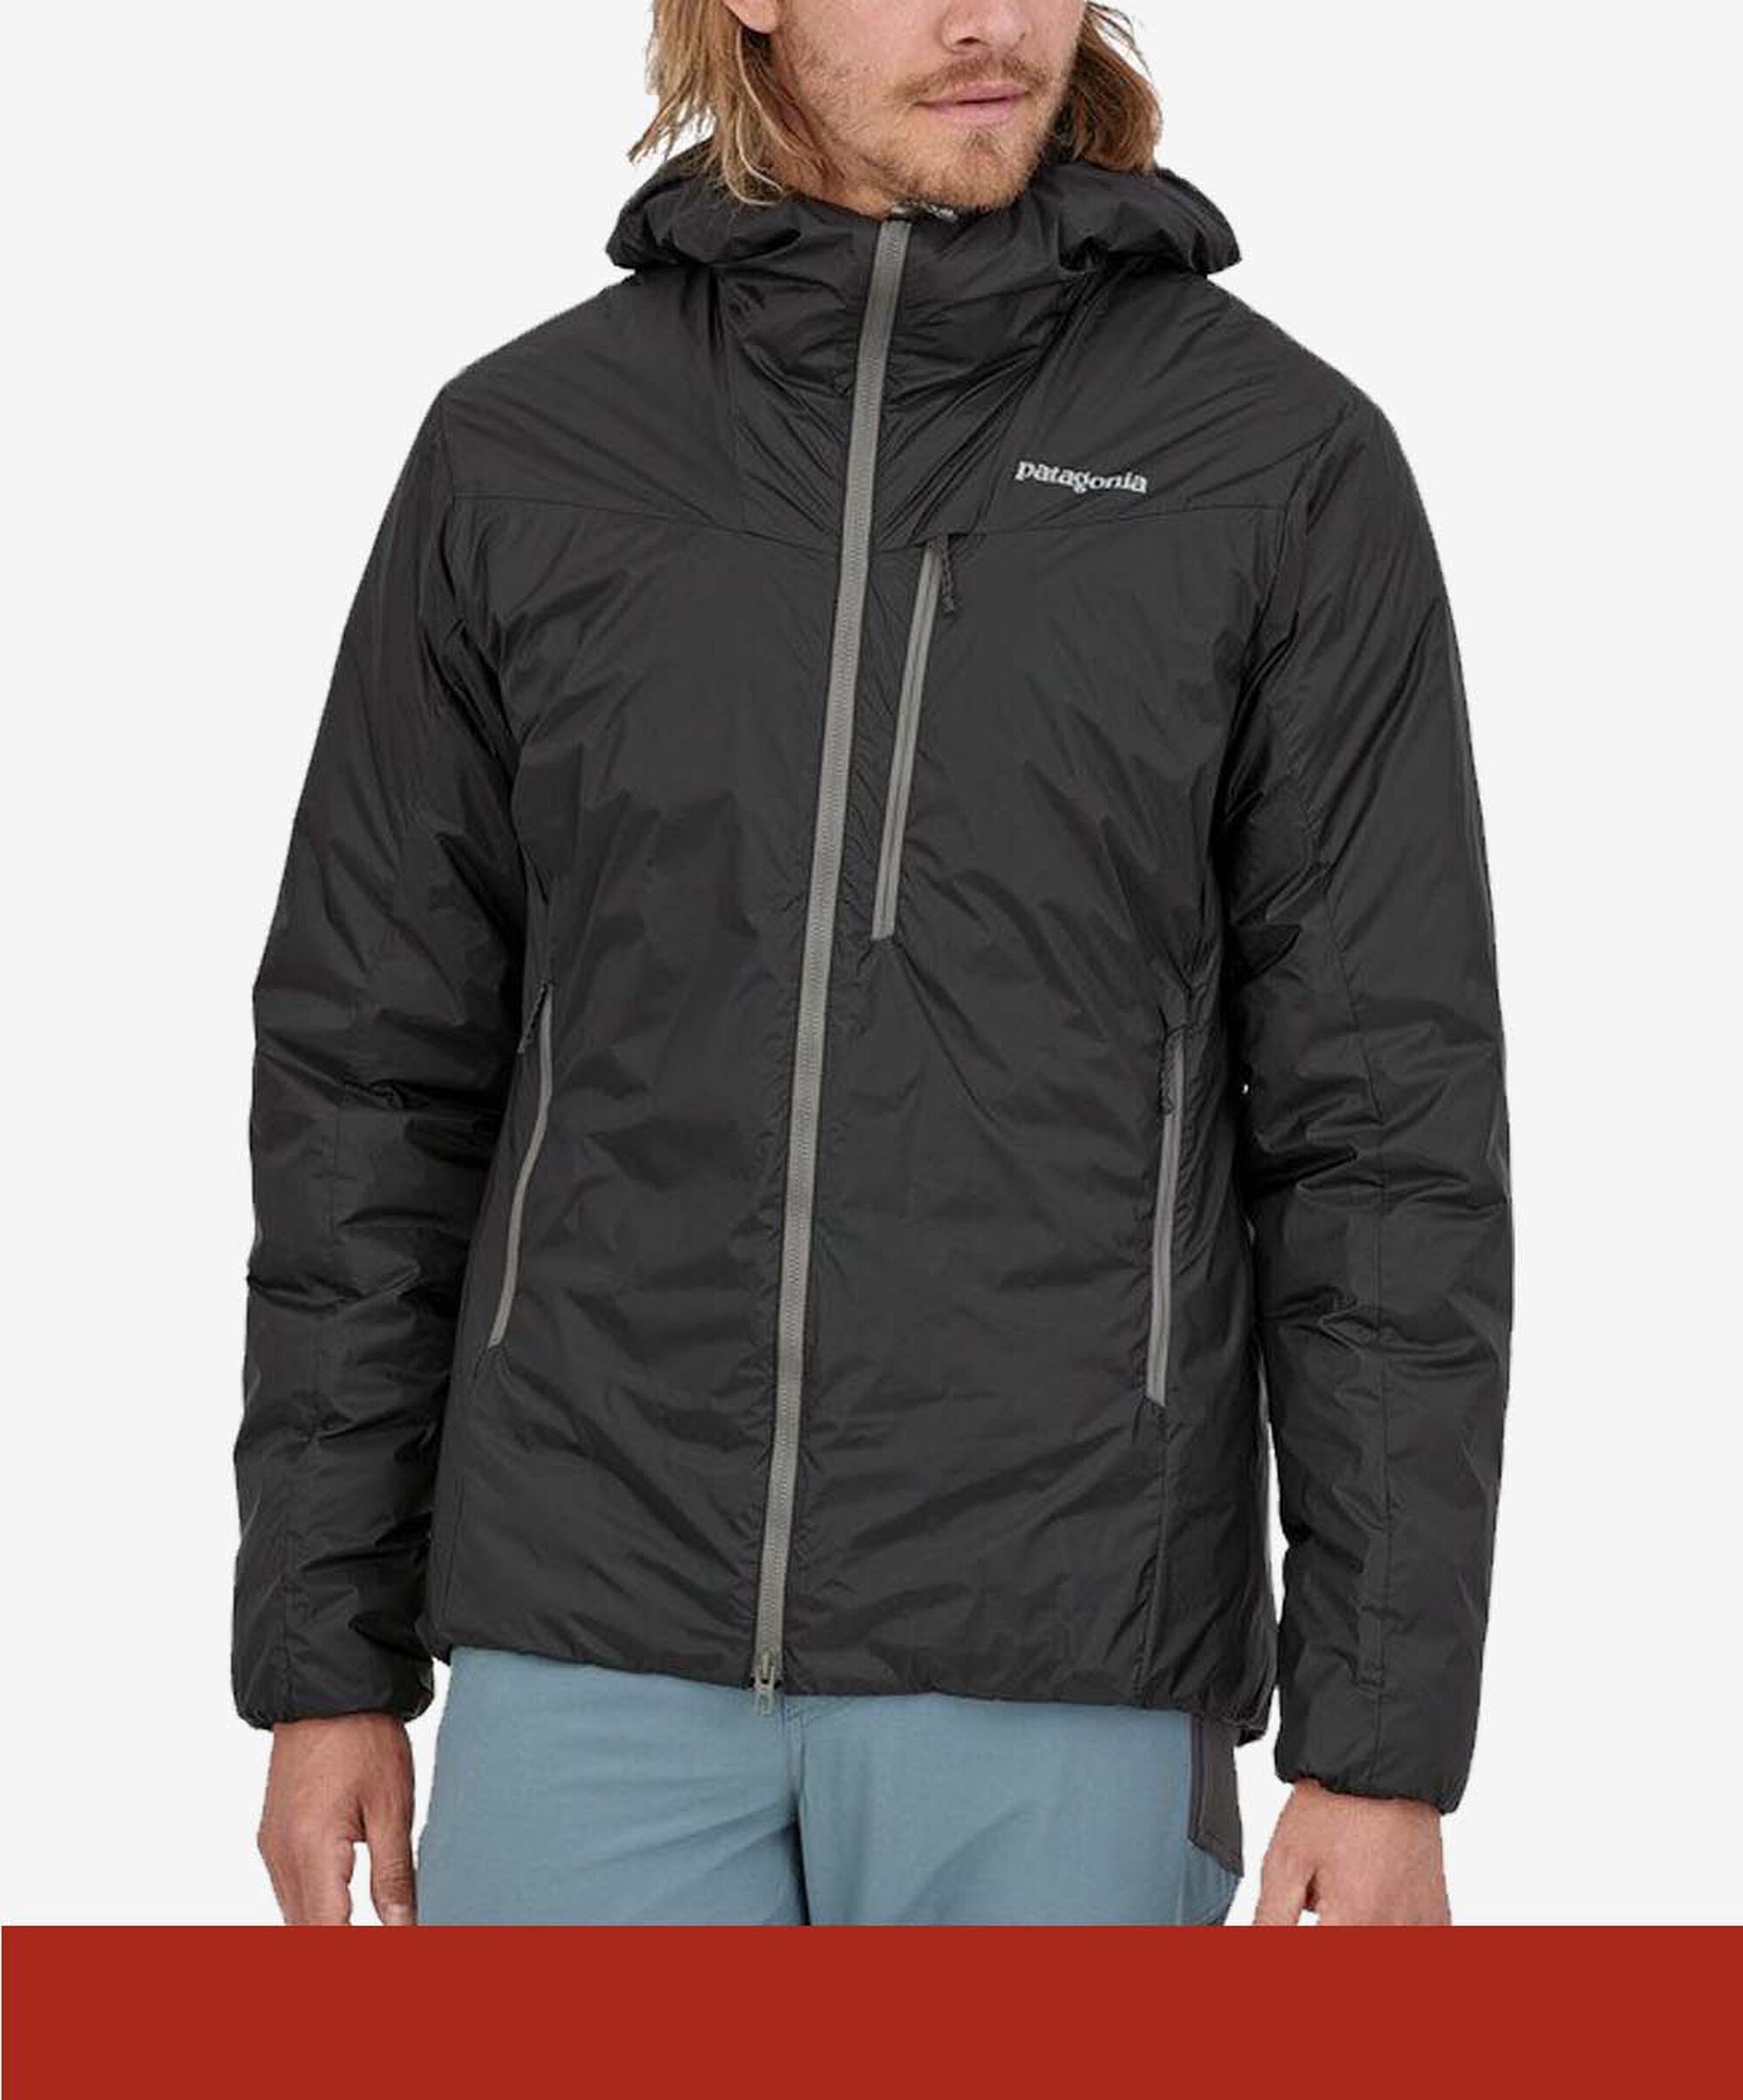 Men's Technical Insulation by Patagonia